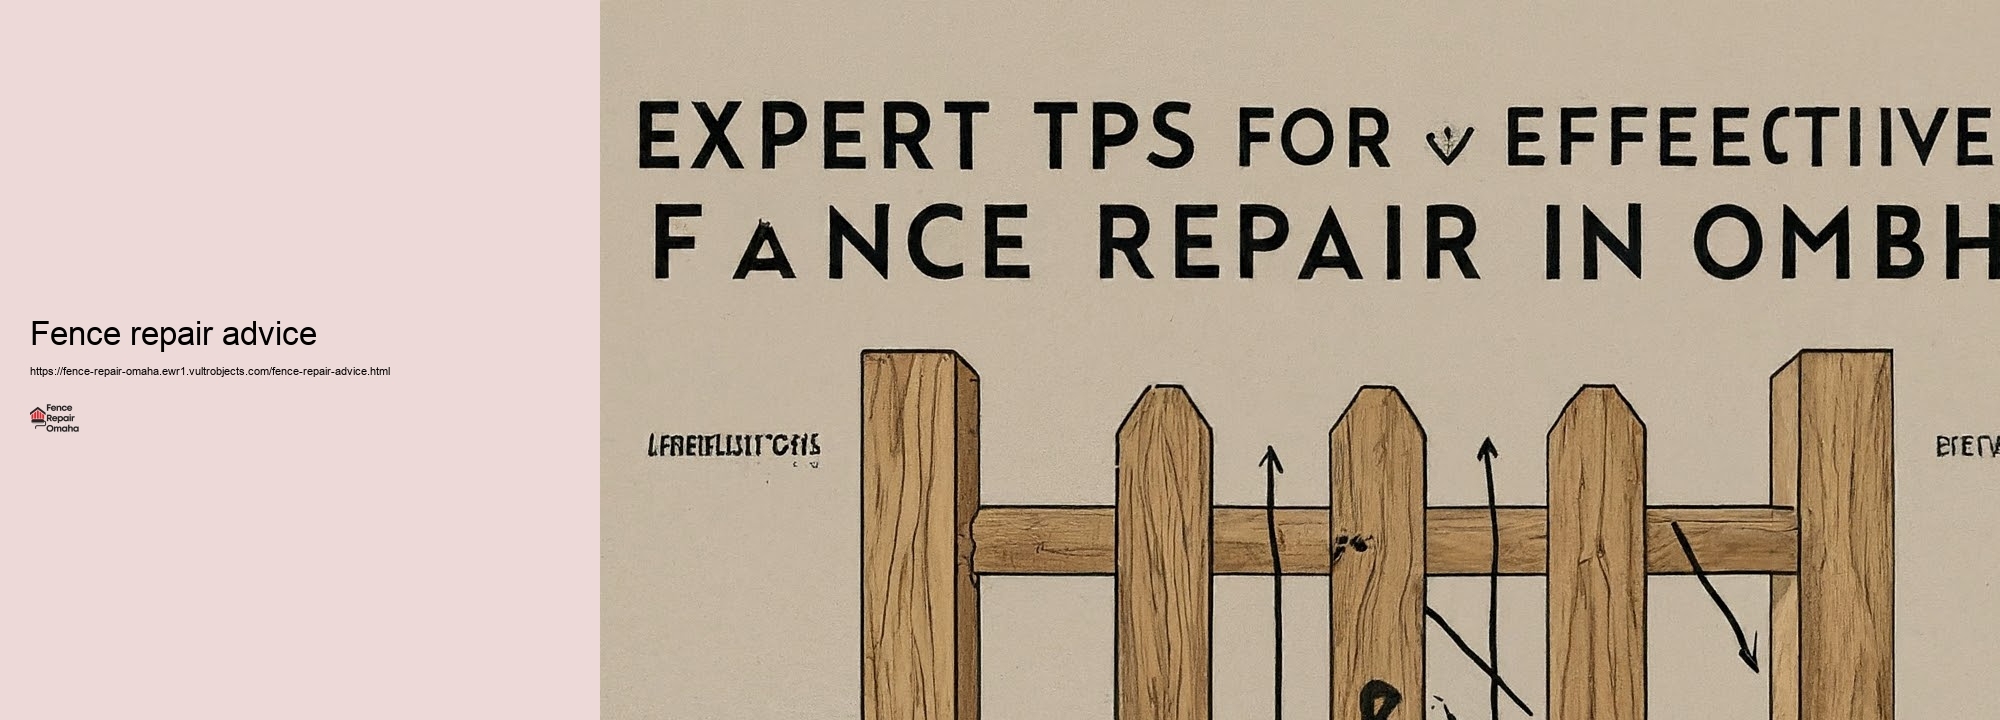 Specialist Tips for Effective Protected fence Repair solution Remedy in Omaha